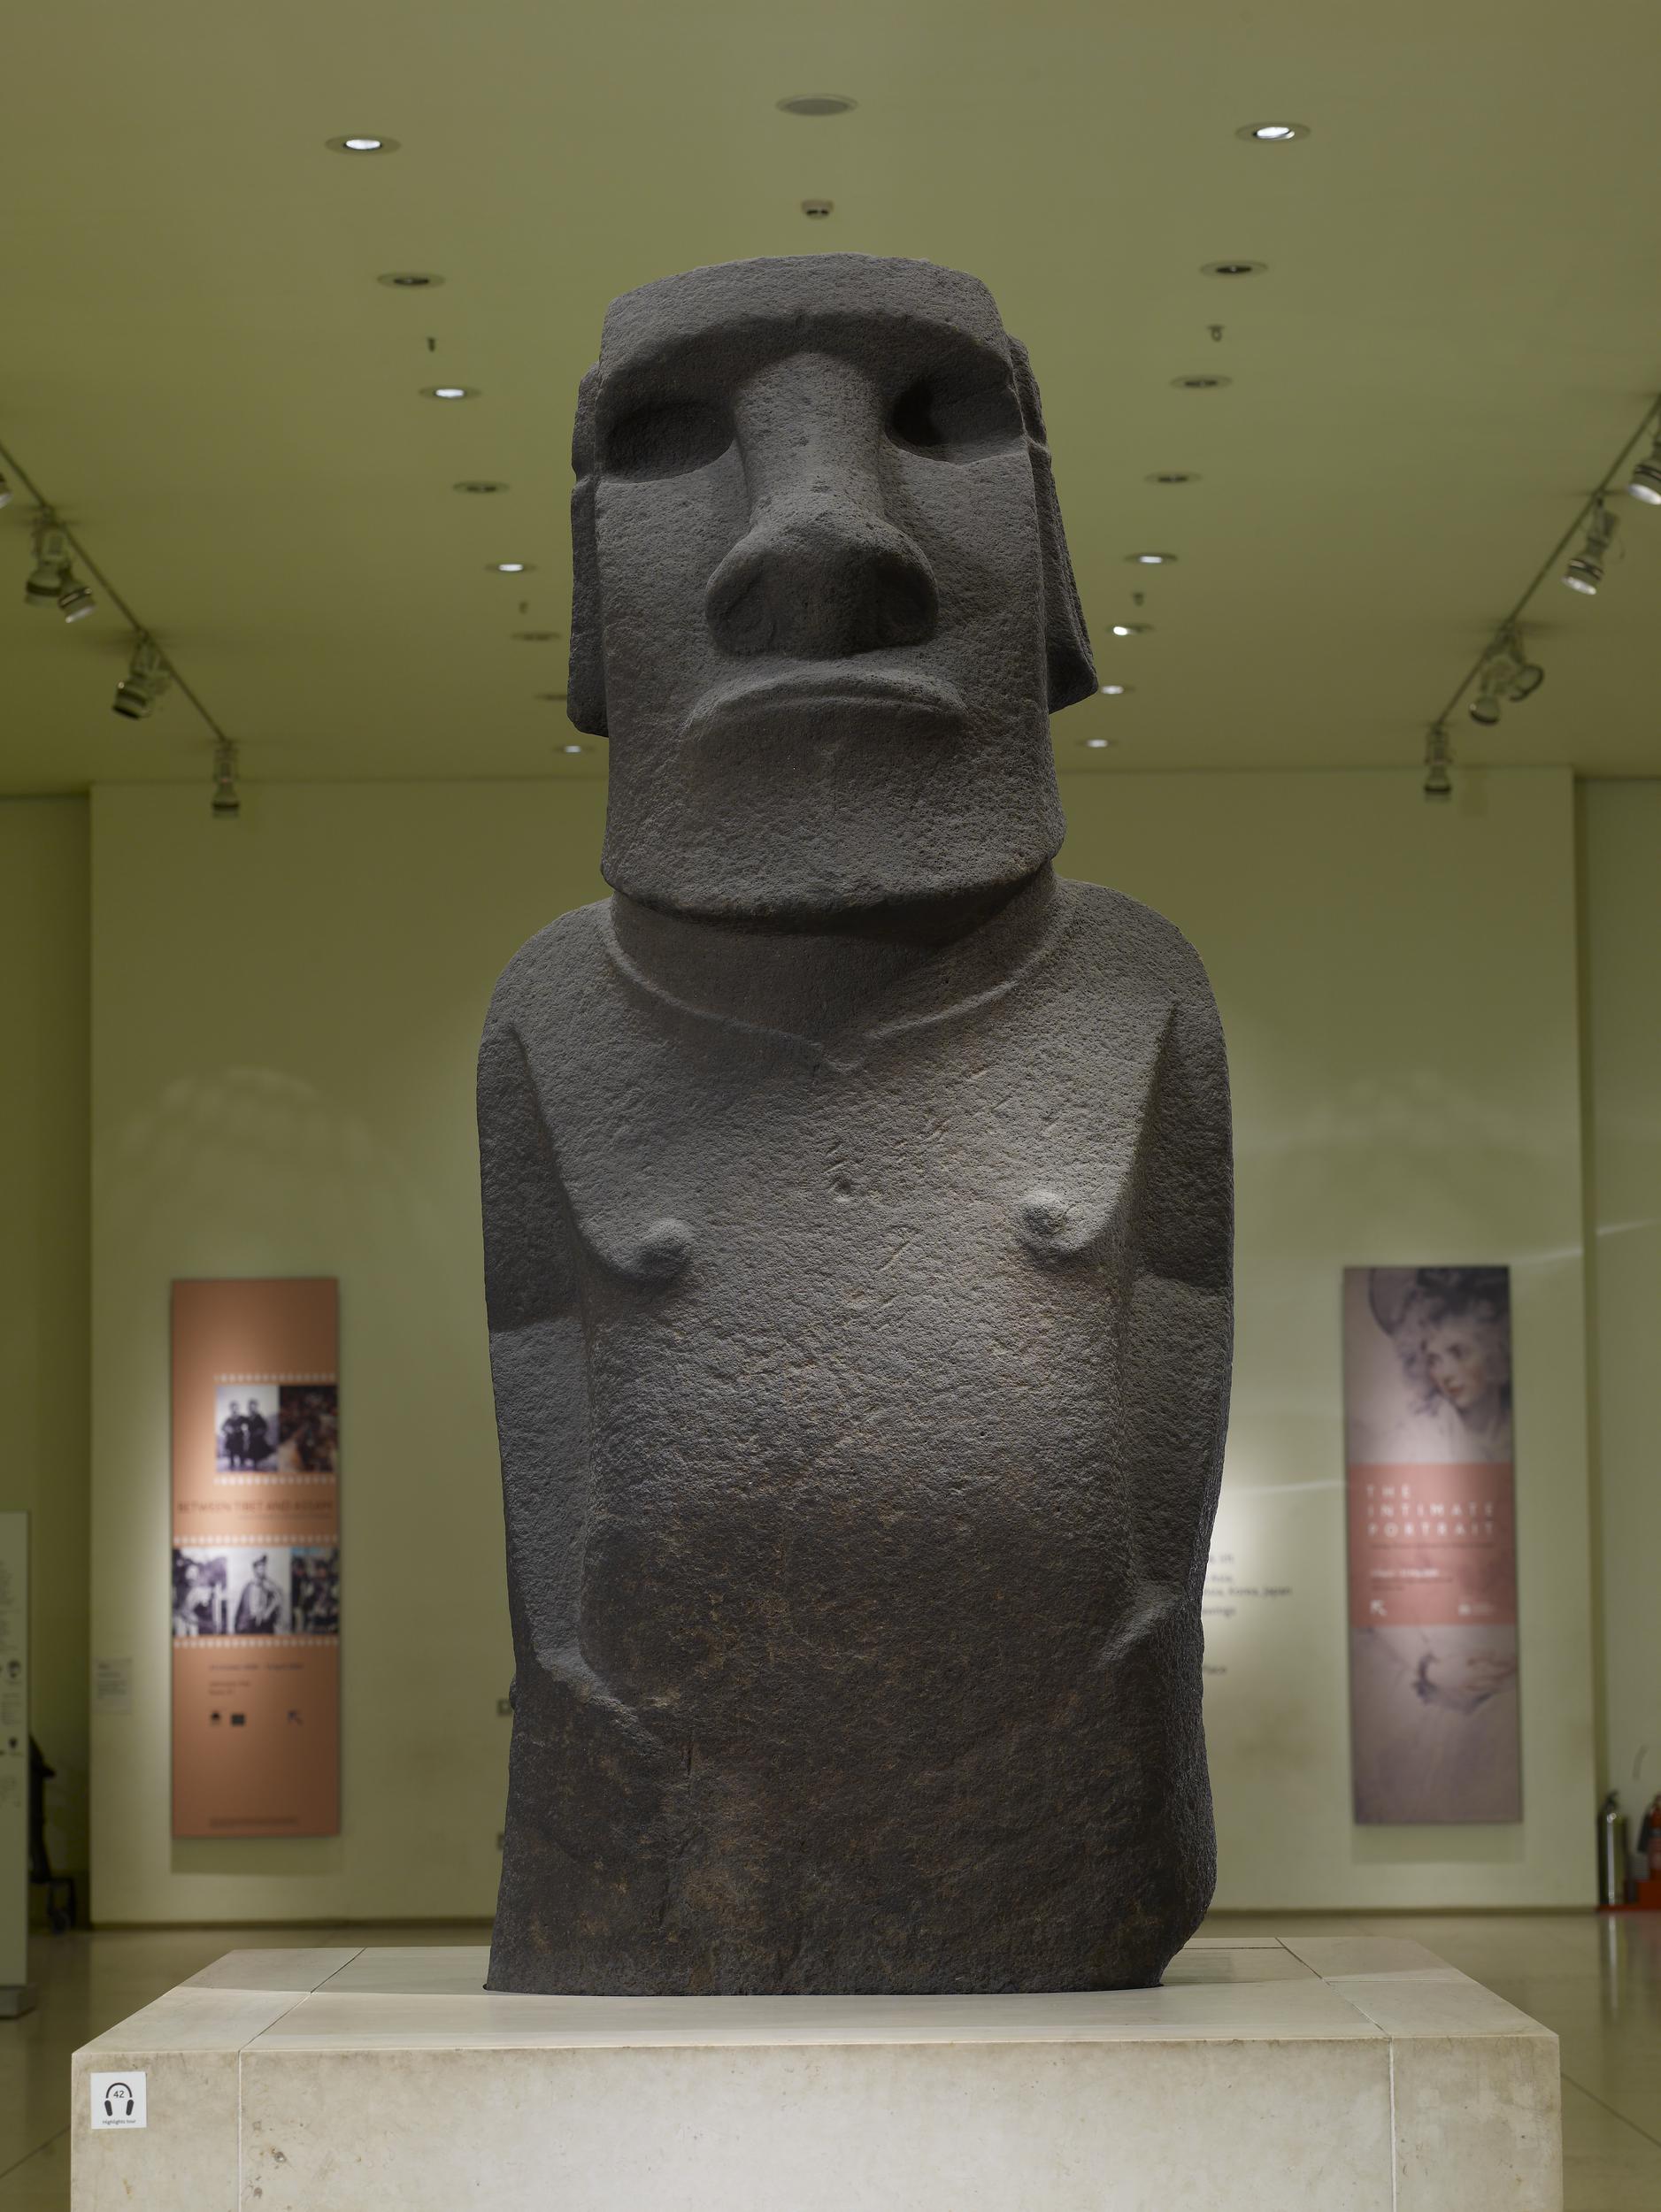 Hoa Hakananai'a ('lost or stolen friend’), Moai (ancestor figure), c. 1200 C.E., 242 x 96 x 47 cm, basalt (missing paint, coral eye sockets, and stone eyes), likely made in Rano Kao, Rapa Nui (Easter Island), found in the ceremonial center Orongo (© The Trustees of the British Museum)